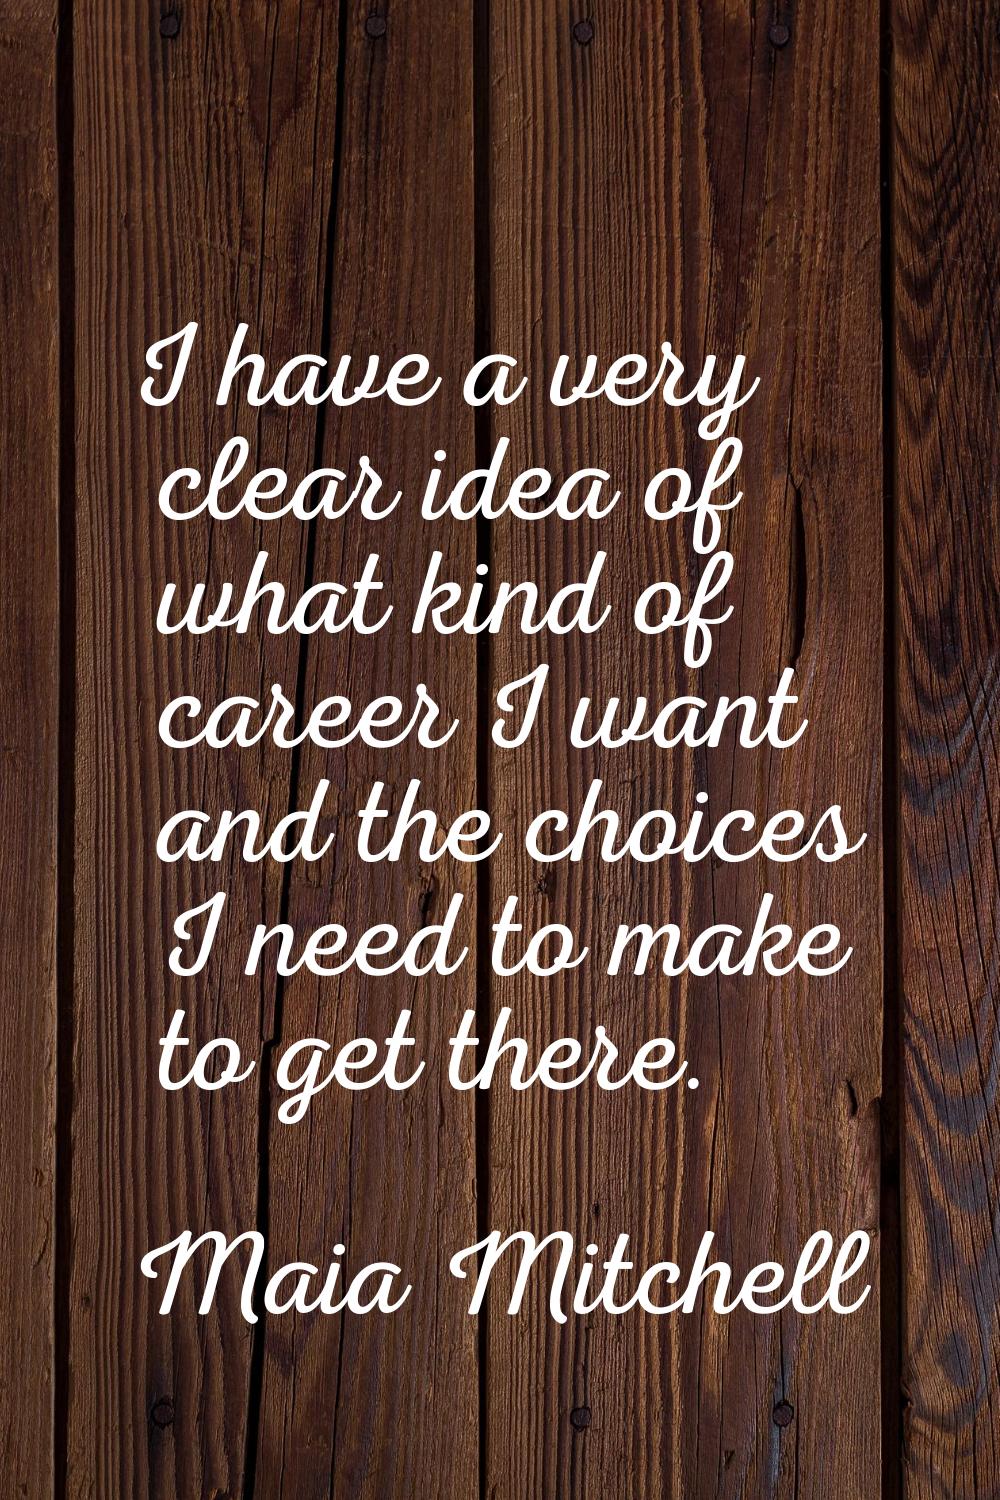 I have a very clear idea of what kind of career I want and the choices I need to make to get there.